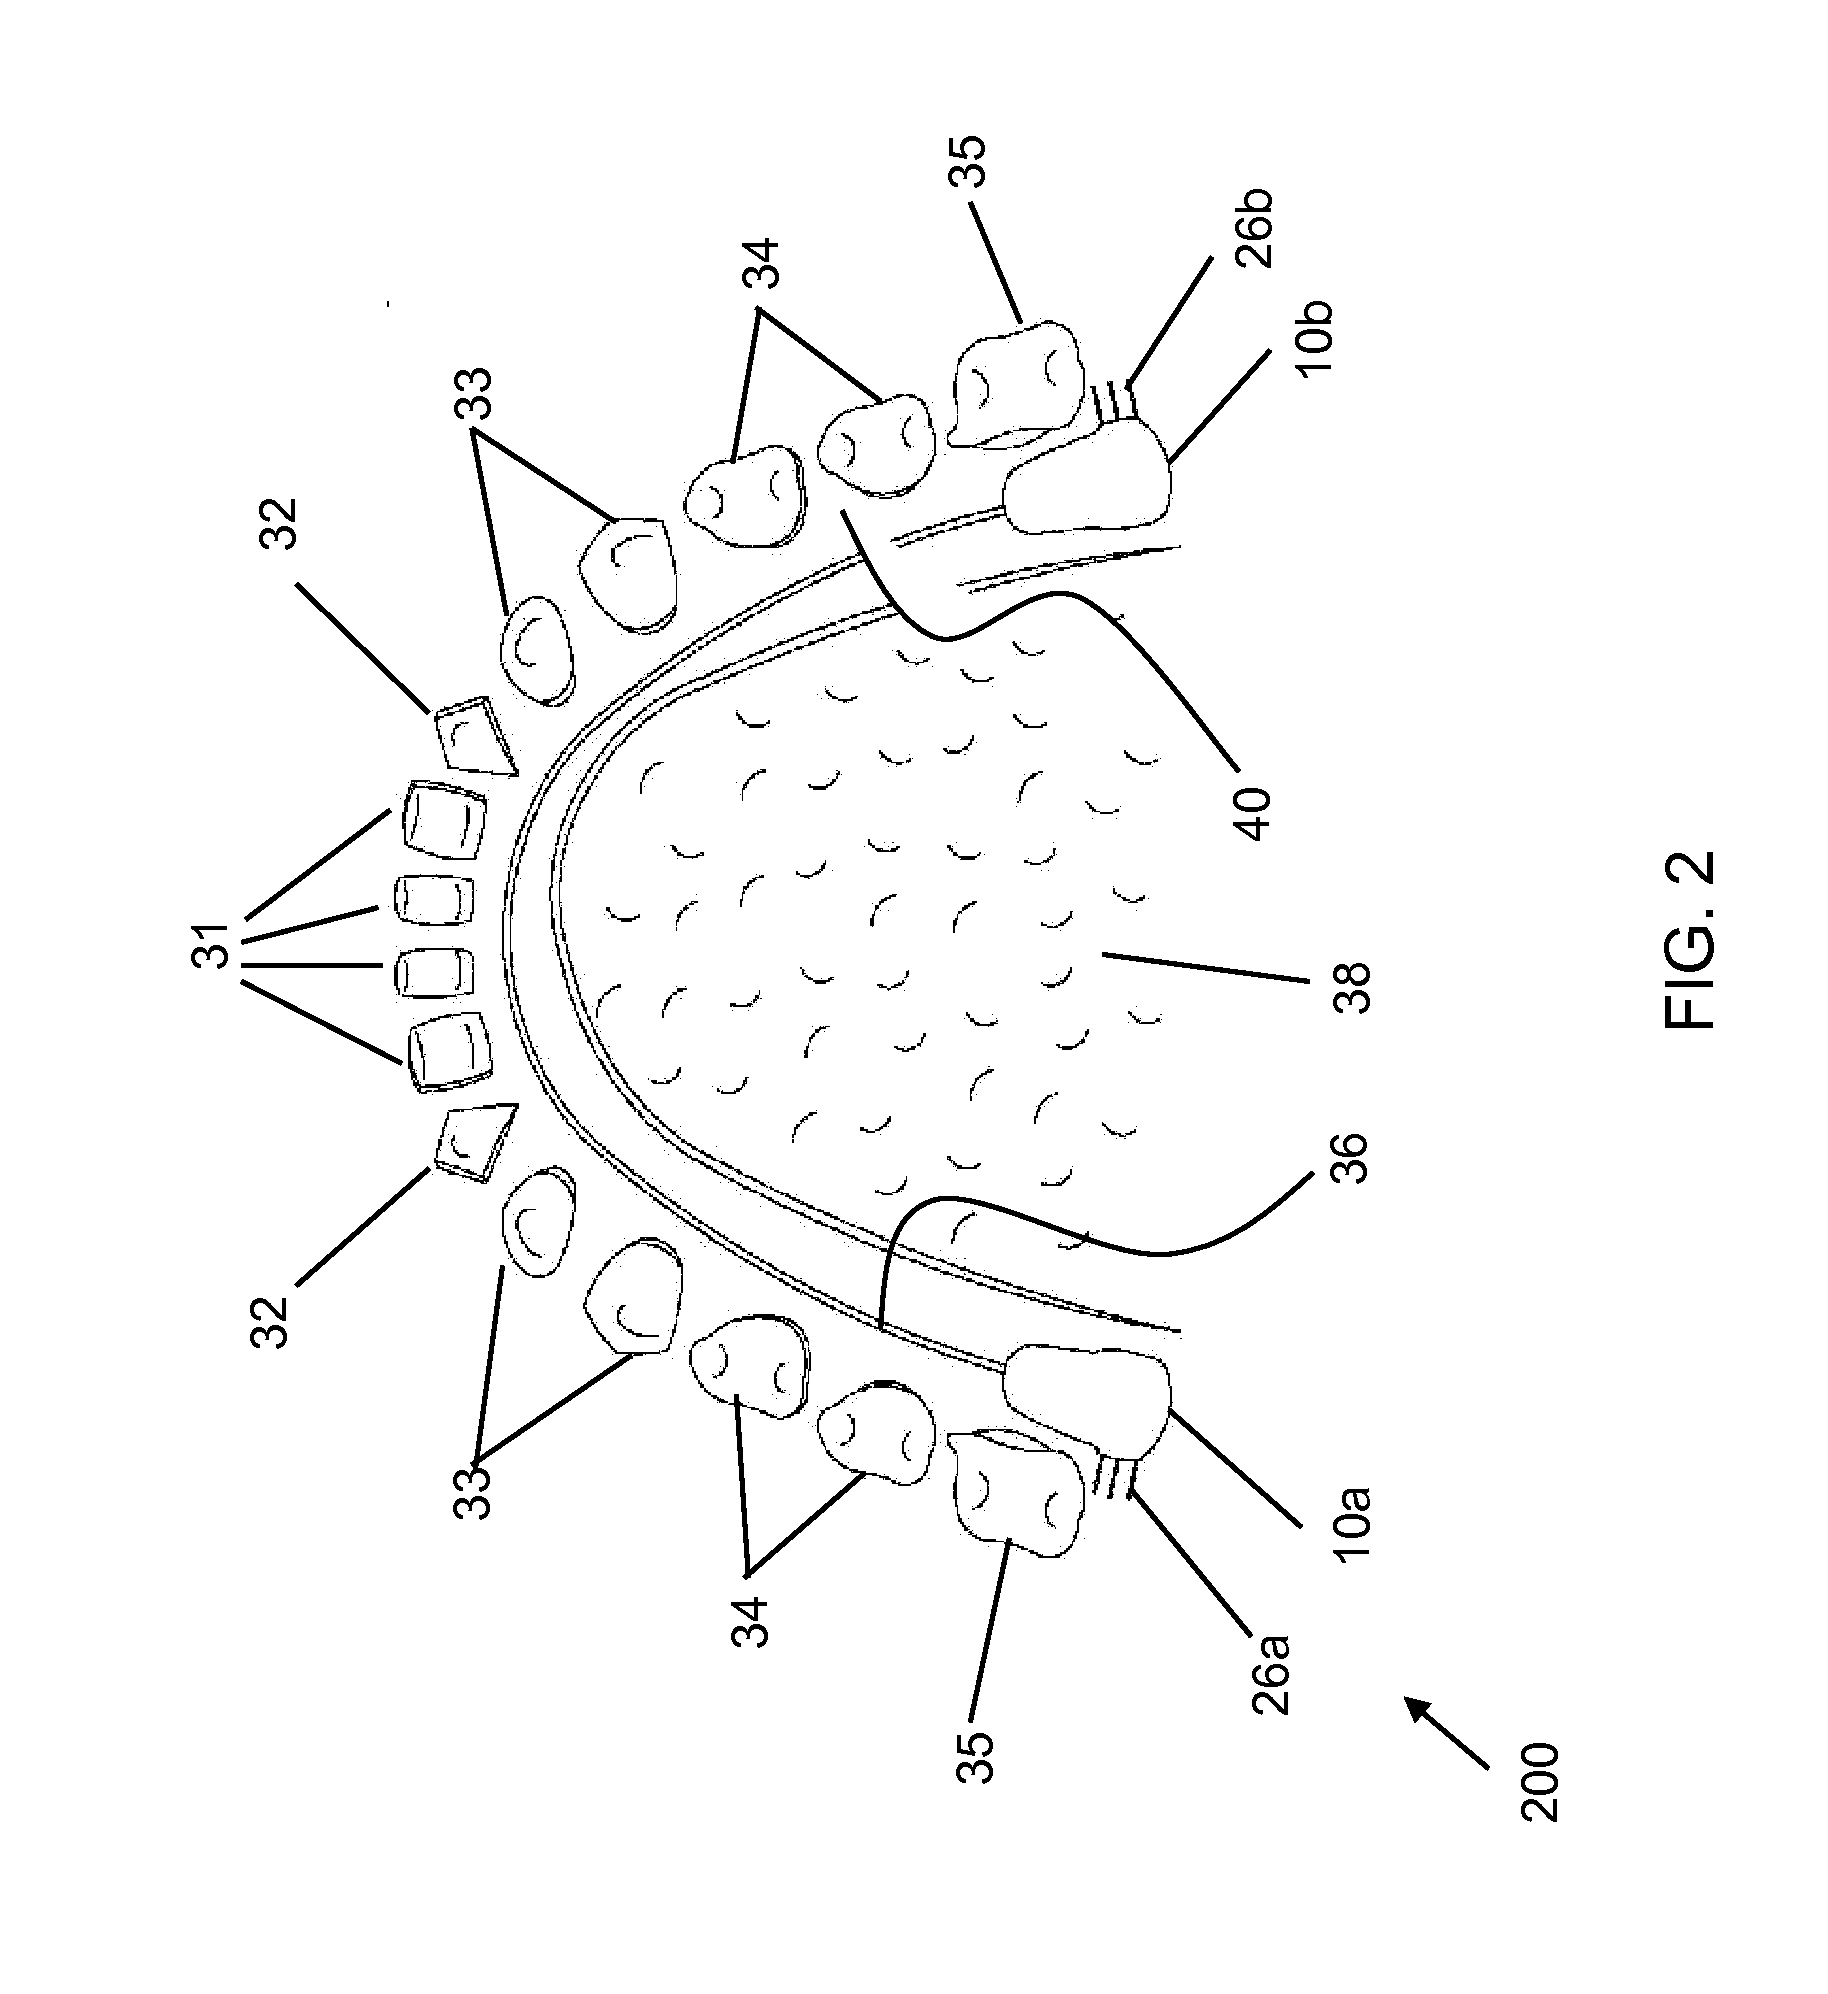 Device and method for stimulating salivation